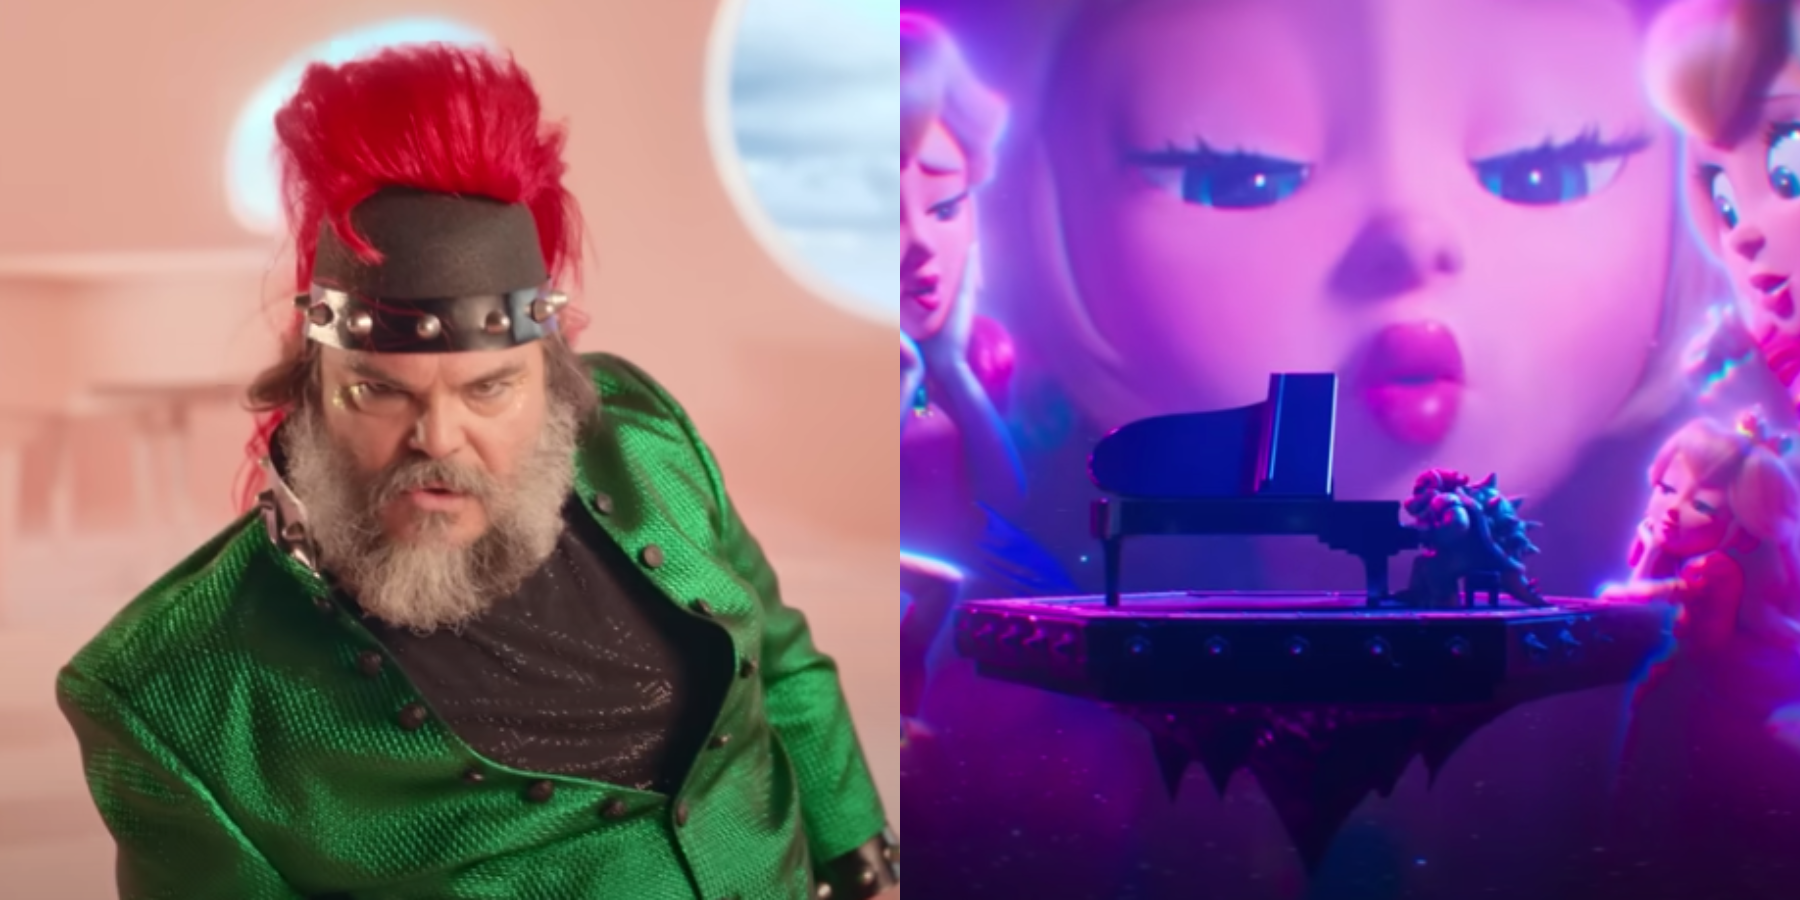 Jack Black's 'Peaches' song from Super Mario movie hits